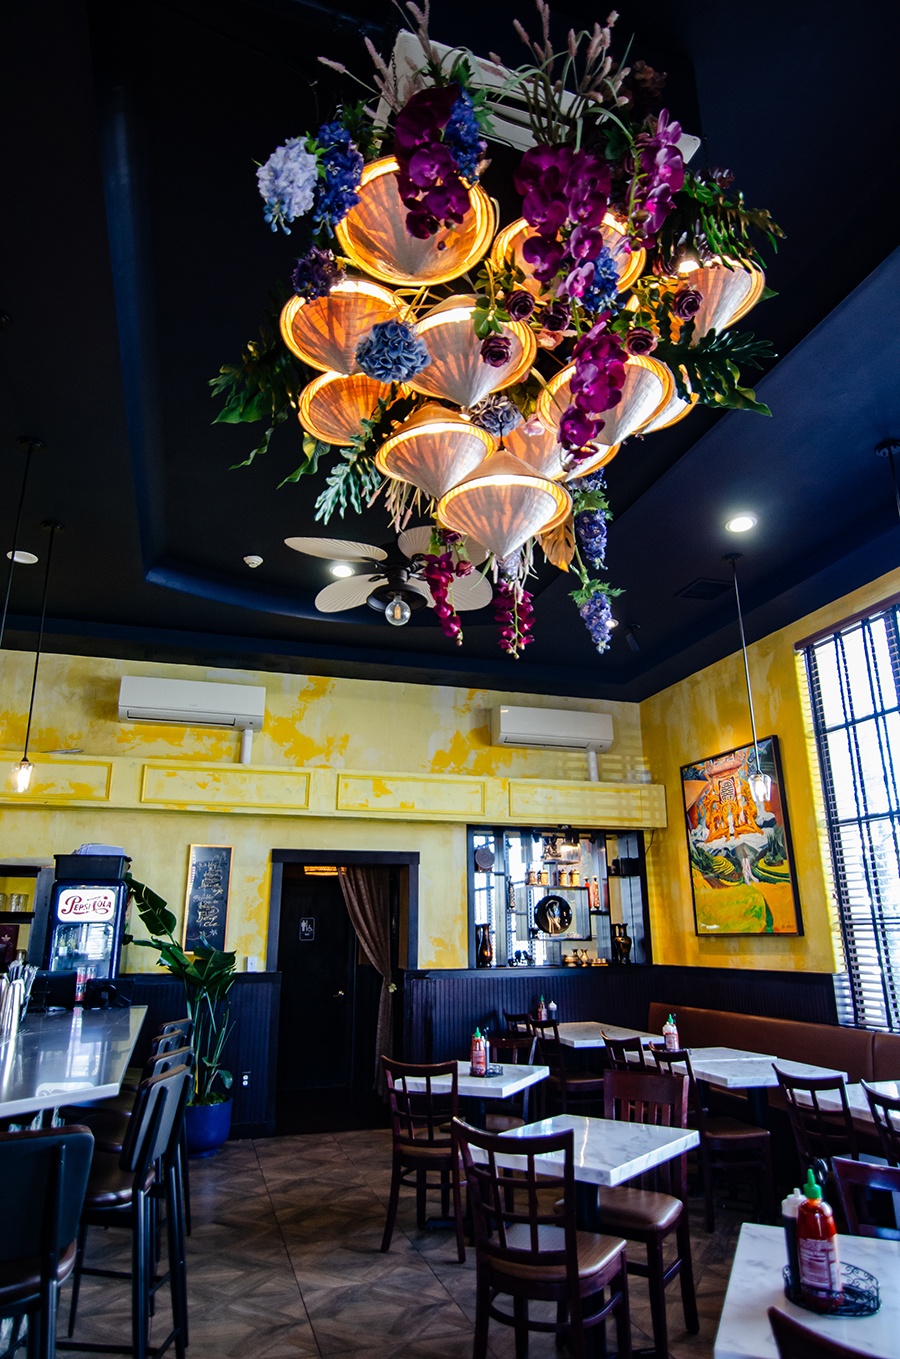 A restaurant dining room features yellow walls, a dark wooden floor, and an intricate light fixture of flowers and Vietnamese hats.